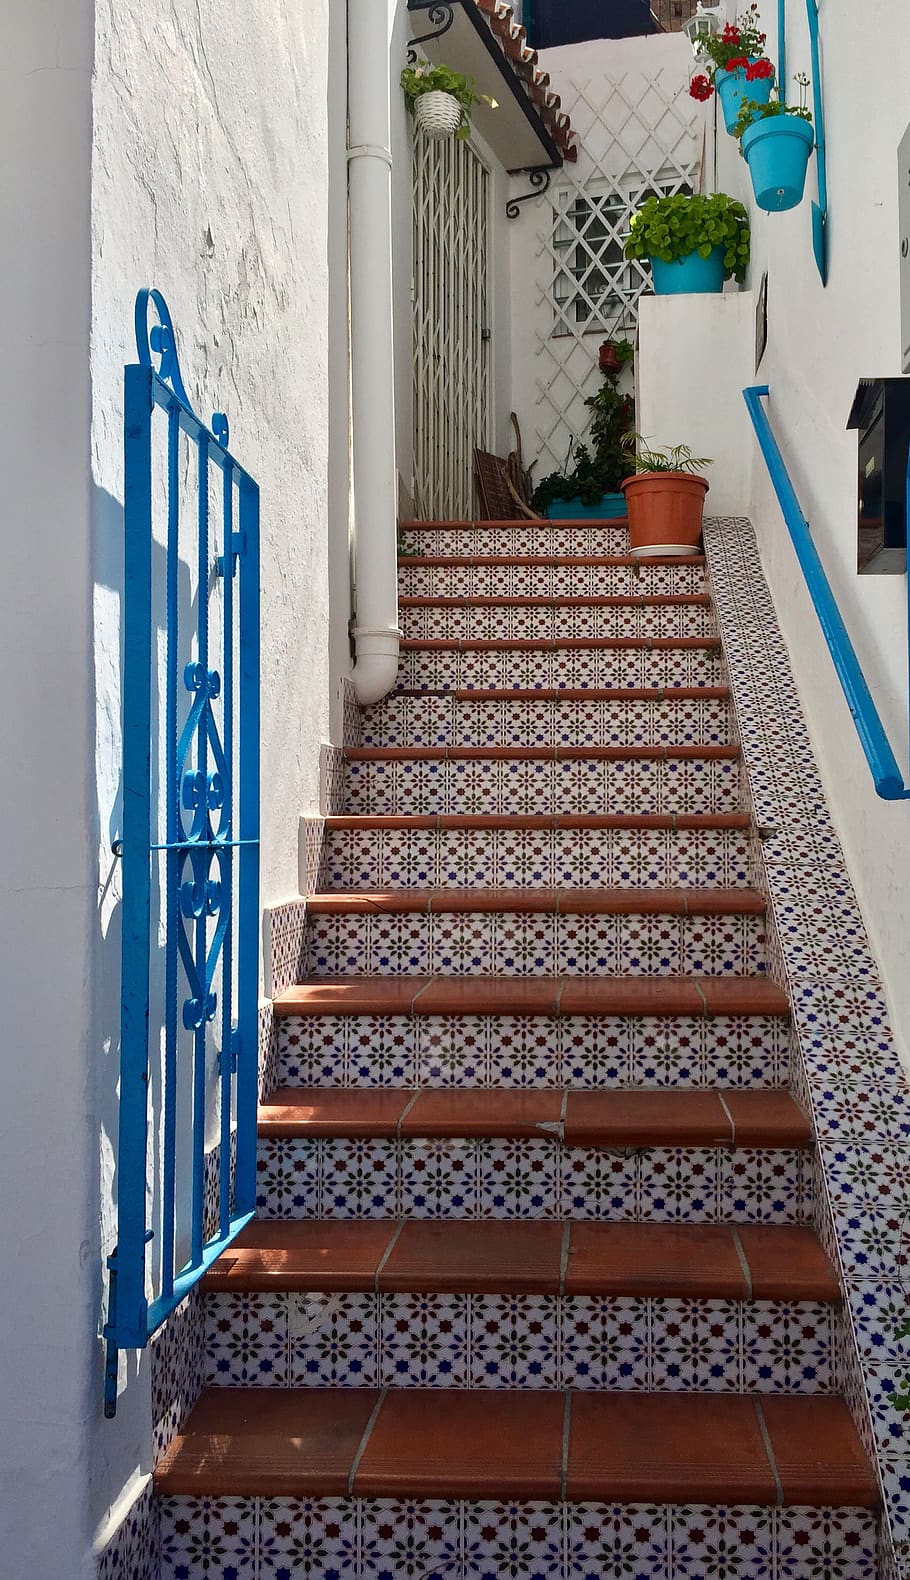 steps, tiles, stairs, tile, staircase, architecture, stairway, design, funky, pattern